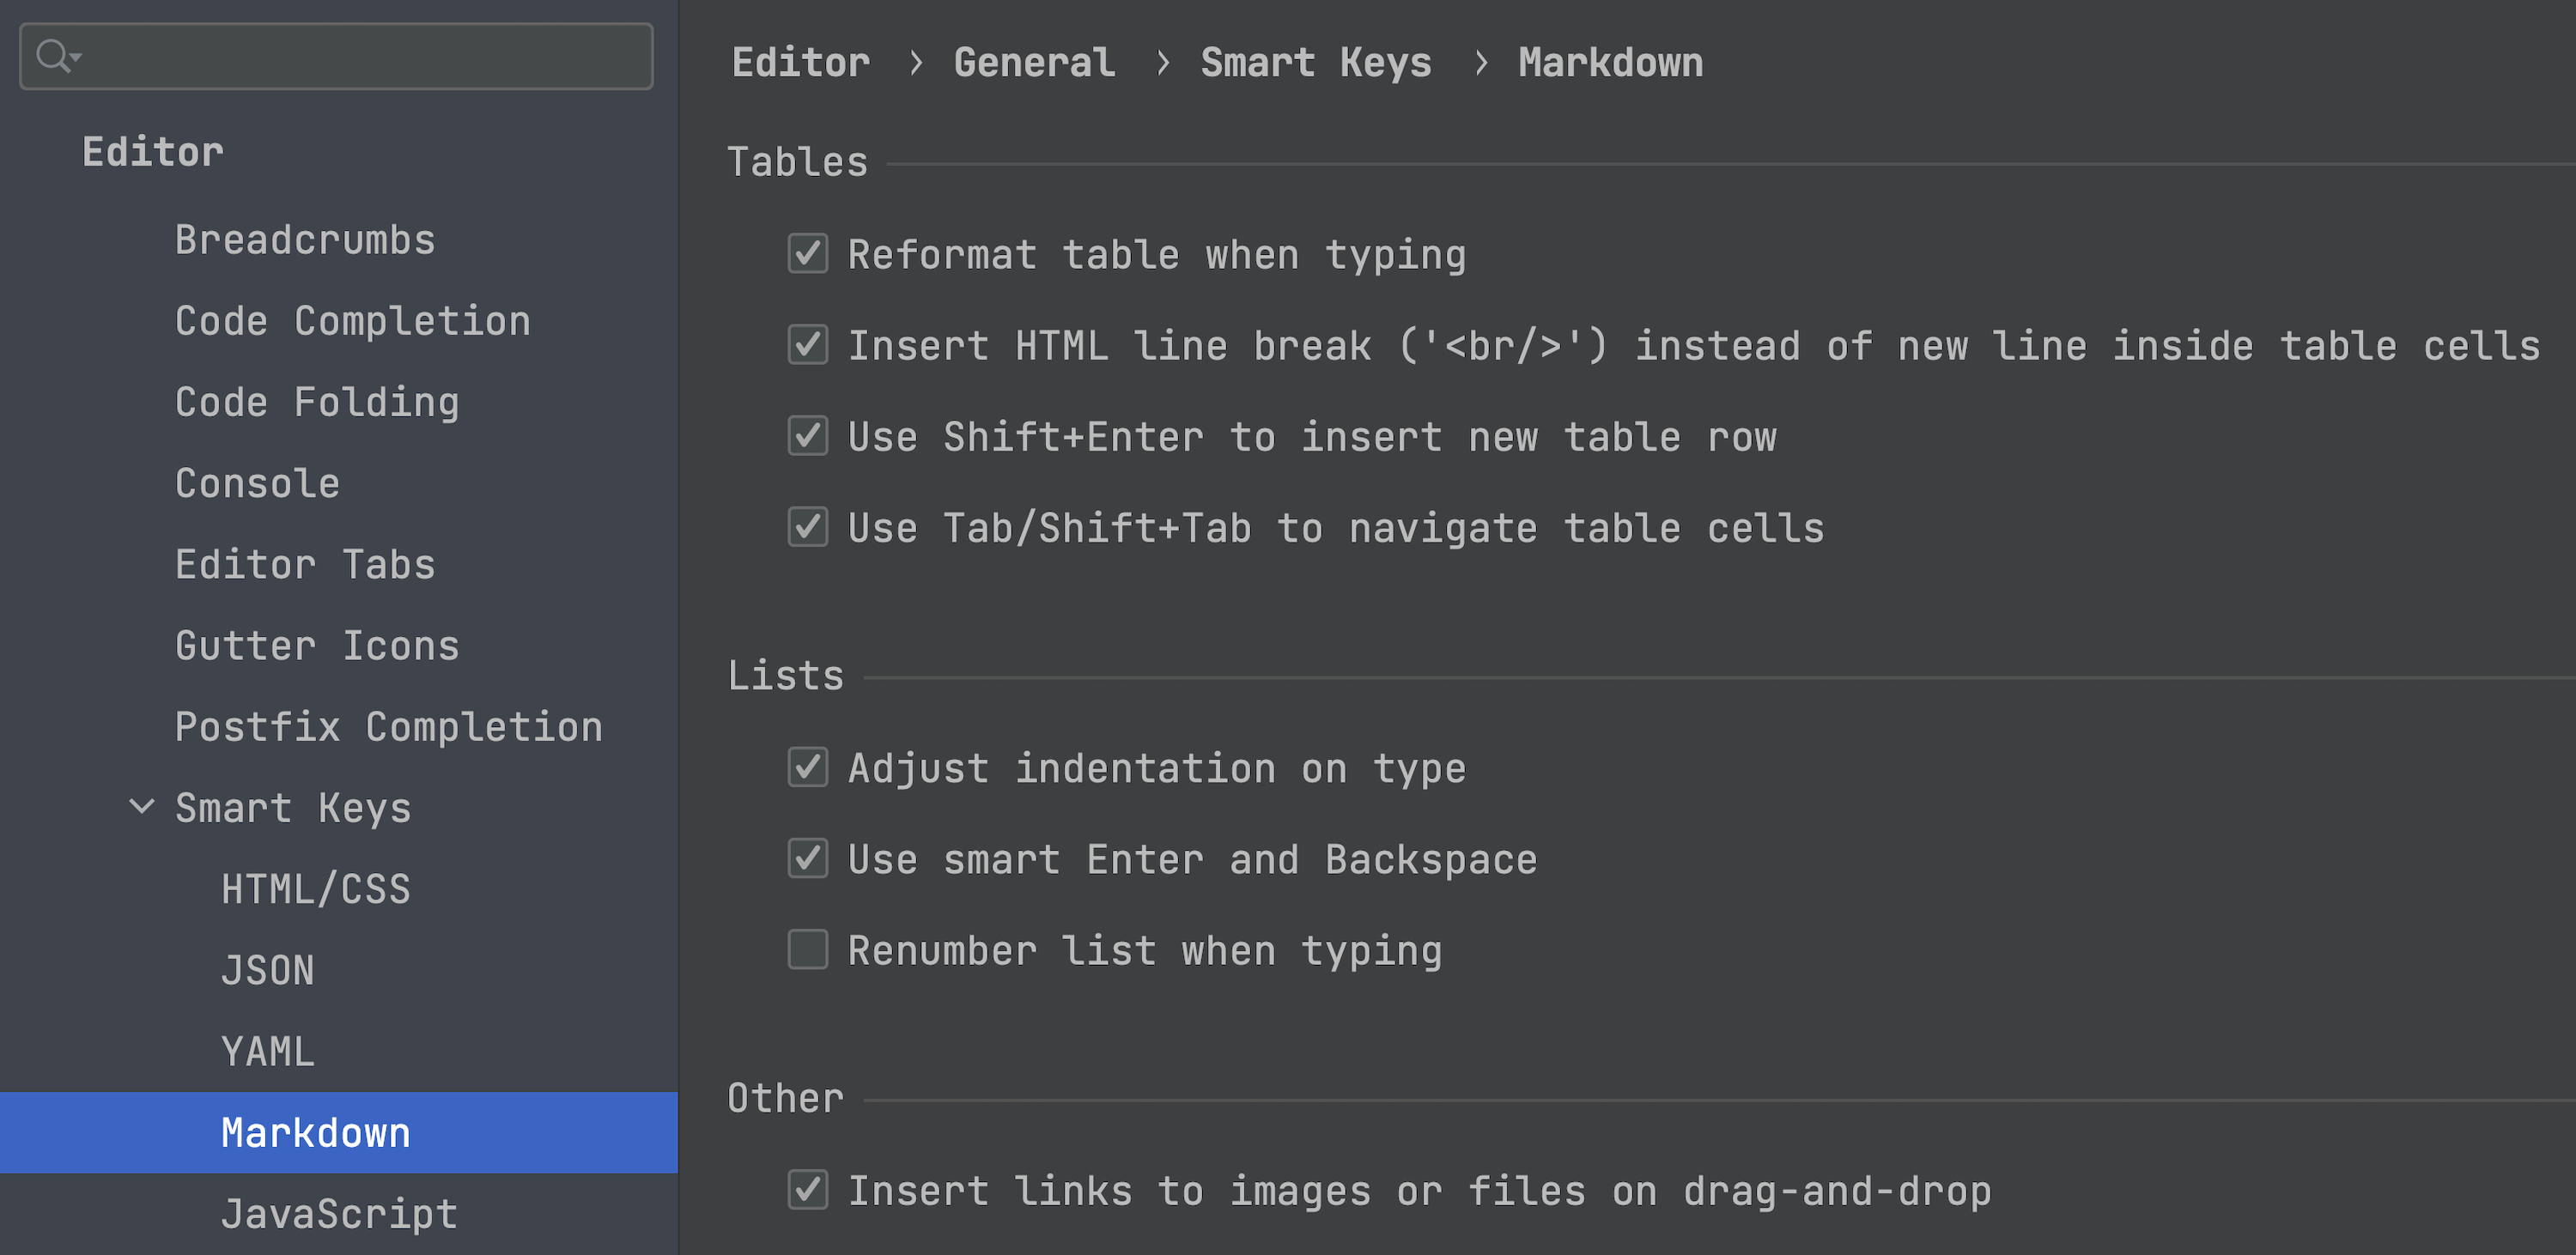 A page with the Markdown Smart Keys settings